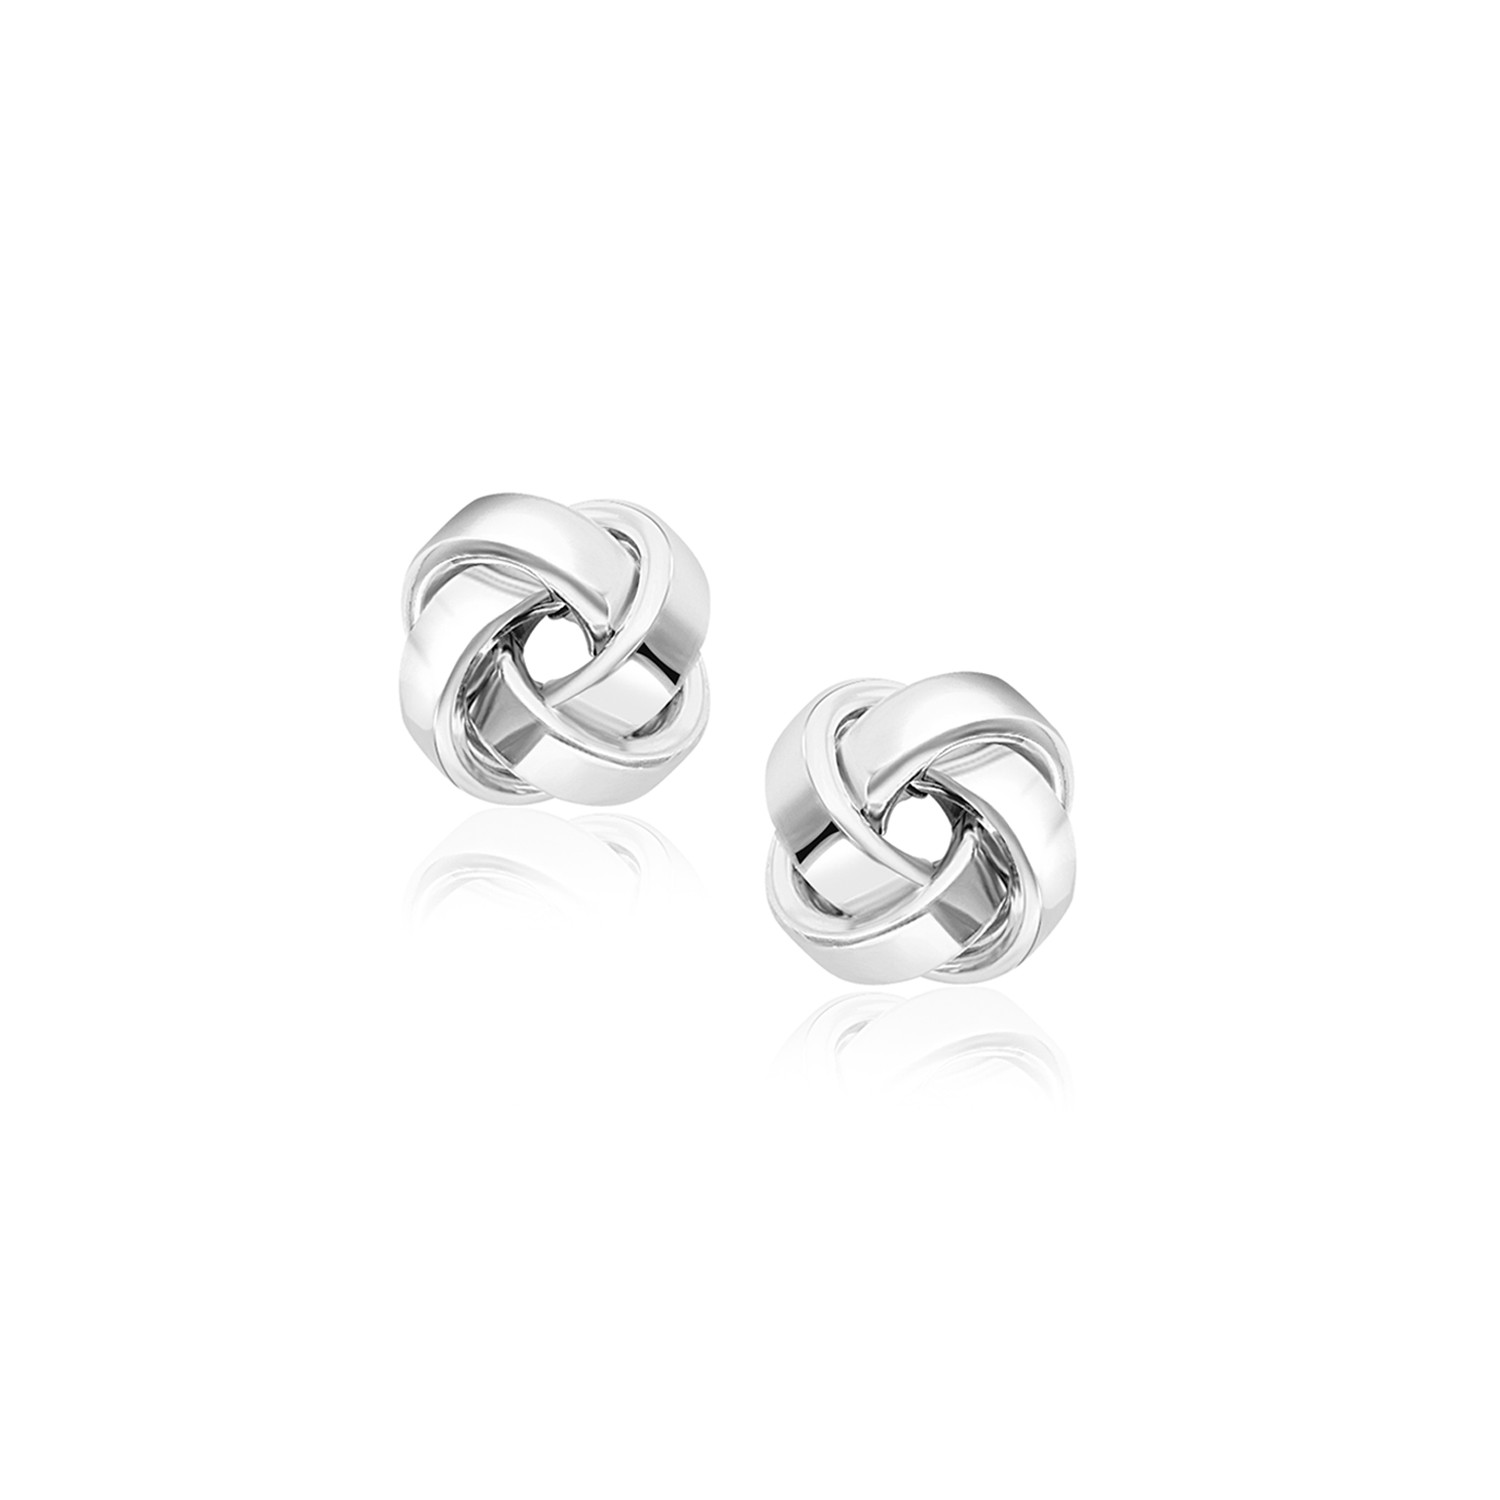 Classic Love Knot Stud Earrings in 14k White Gold - Richard Cannon Jewelry